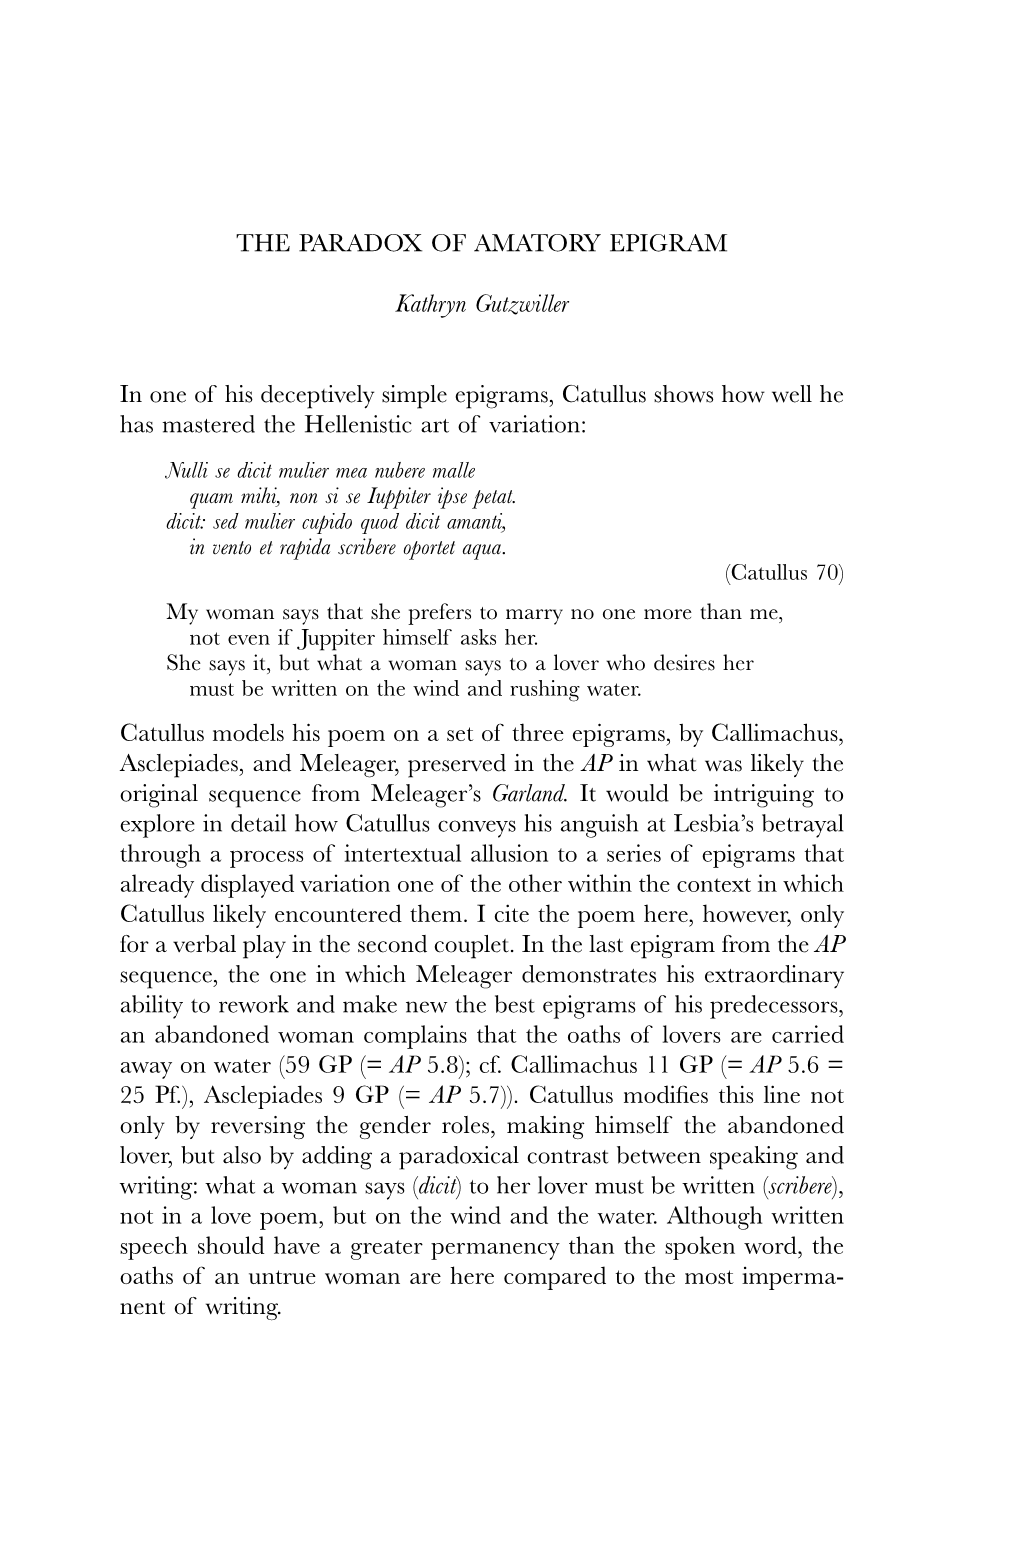 THE PARADOX of AMATORY EPIGRAM Kathryn Gutzwiller in One of His Deceptively Simple Epigrams, Catullus Shows How Well He Has Mast